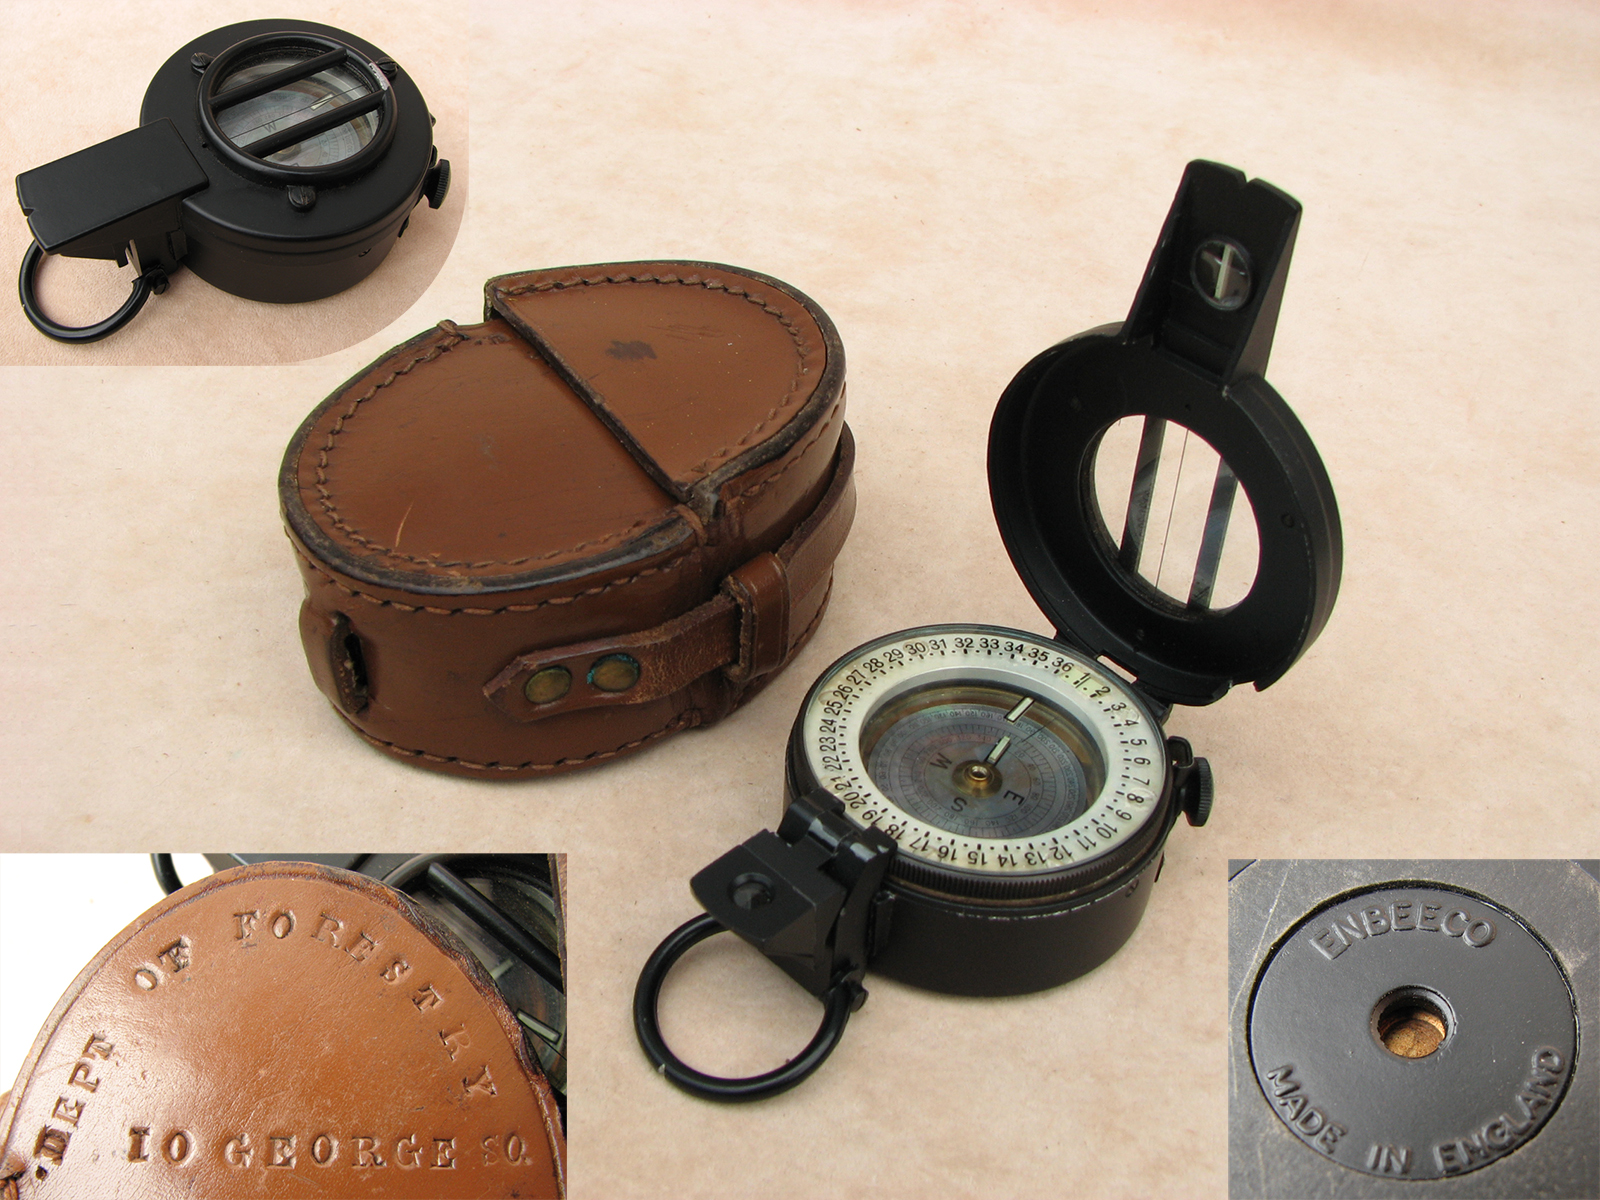 M73 specification prismatic compass by Enbeeco